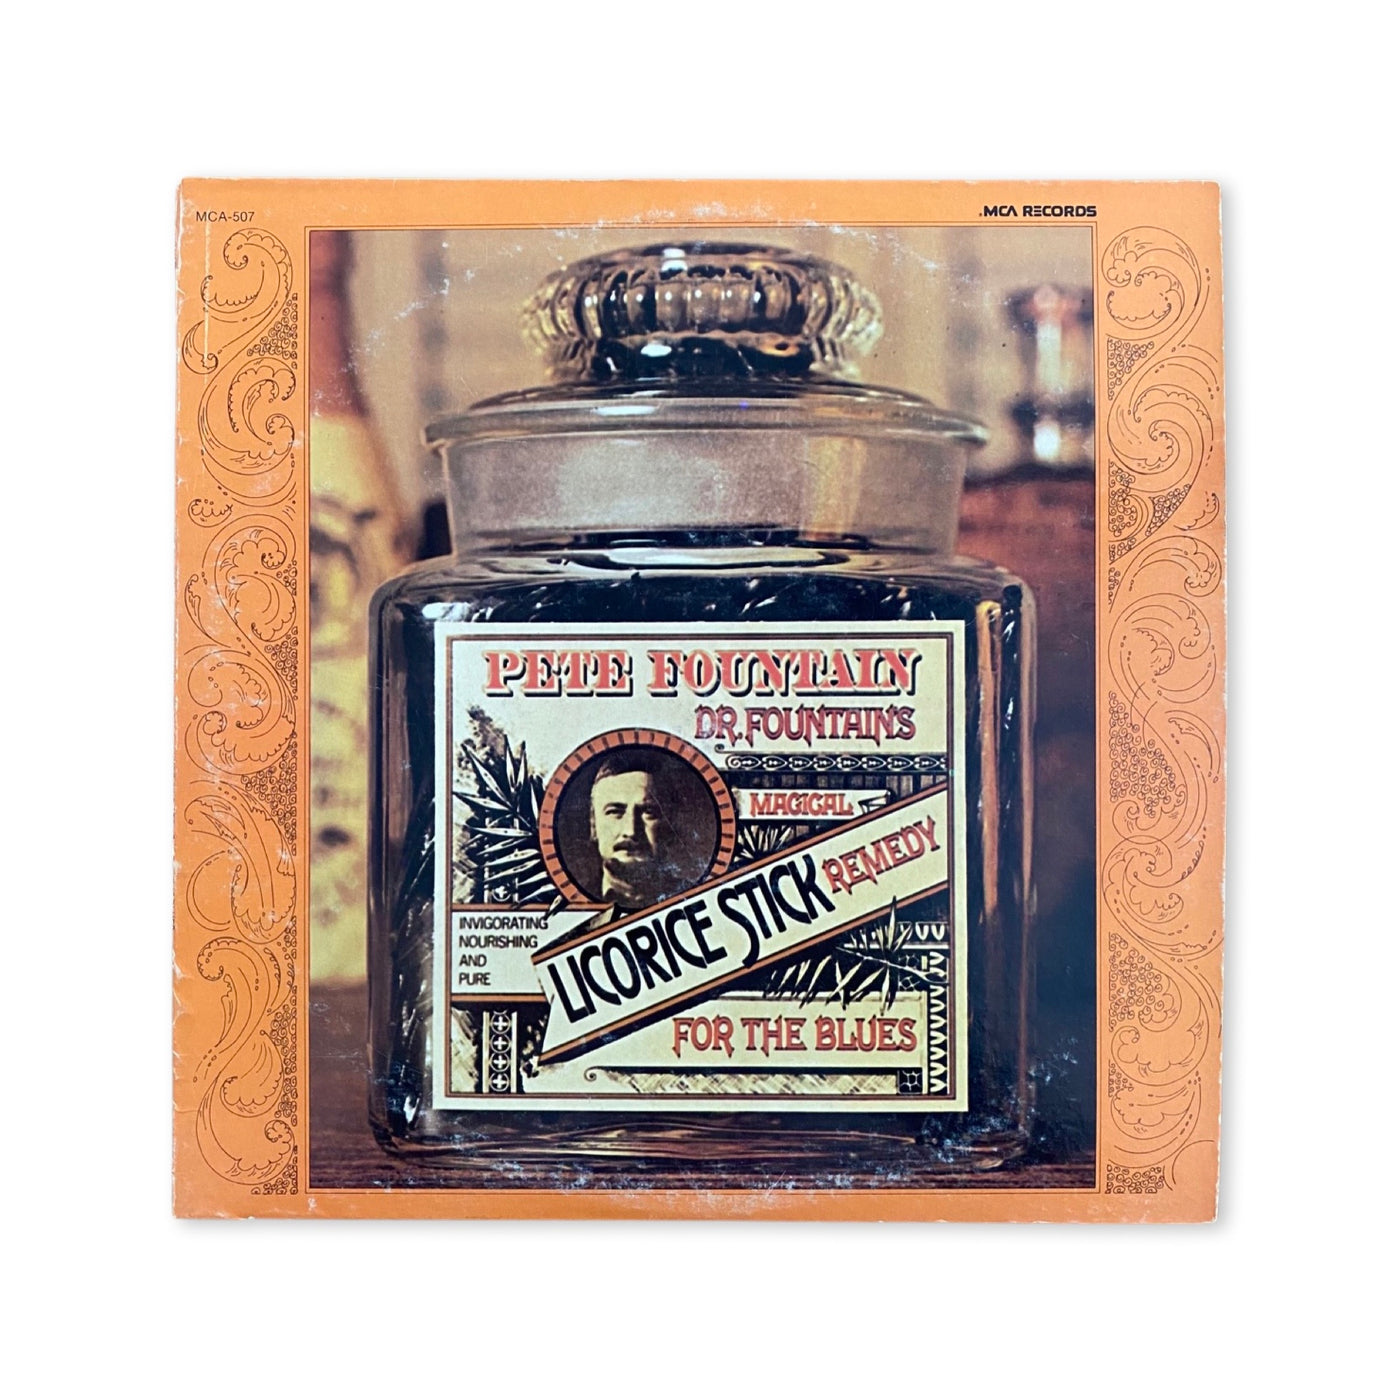 Pete Fountain - Dr. Fountain's Magical Licorice Stick Remedy For The Blues